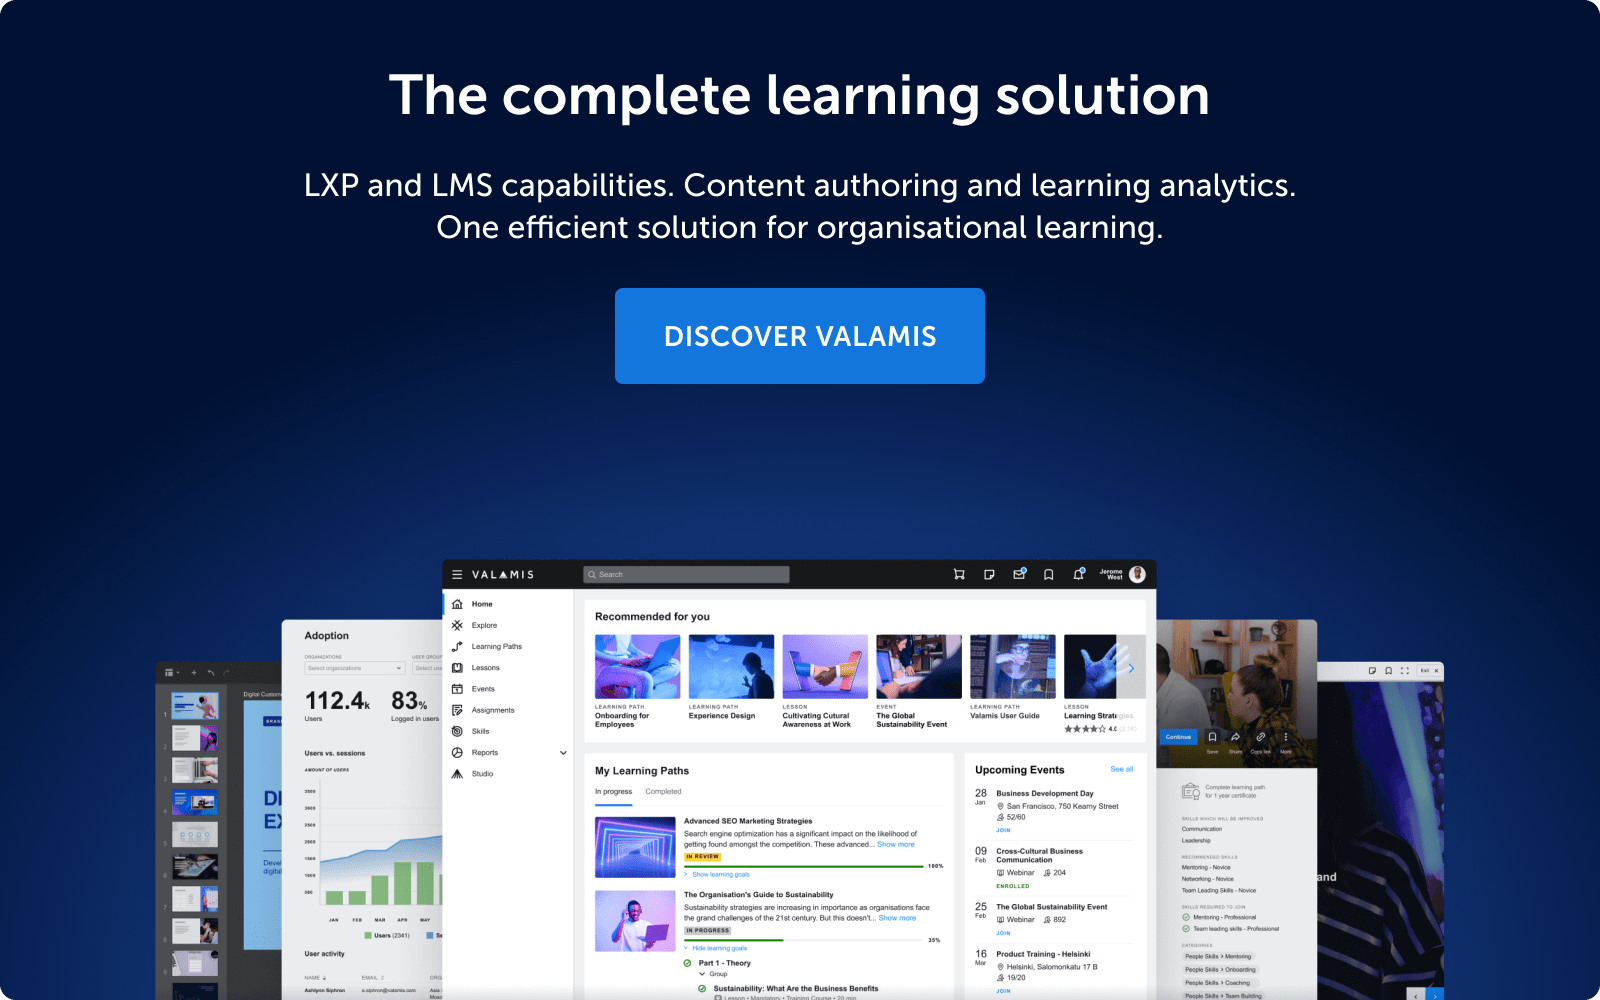 Valamis is the complete learning solution banner